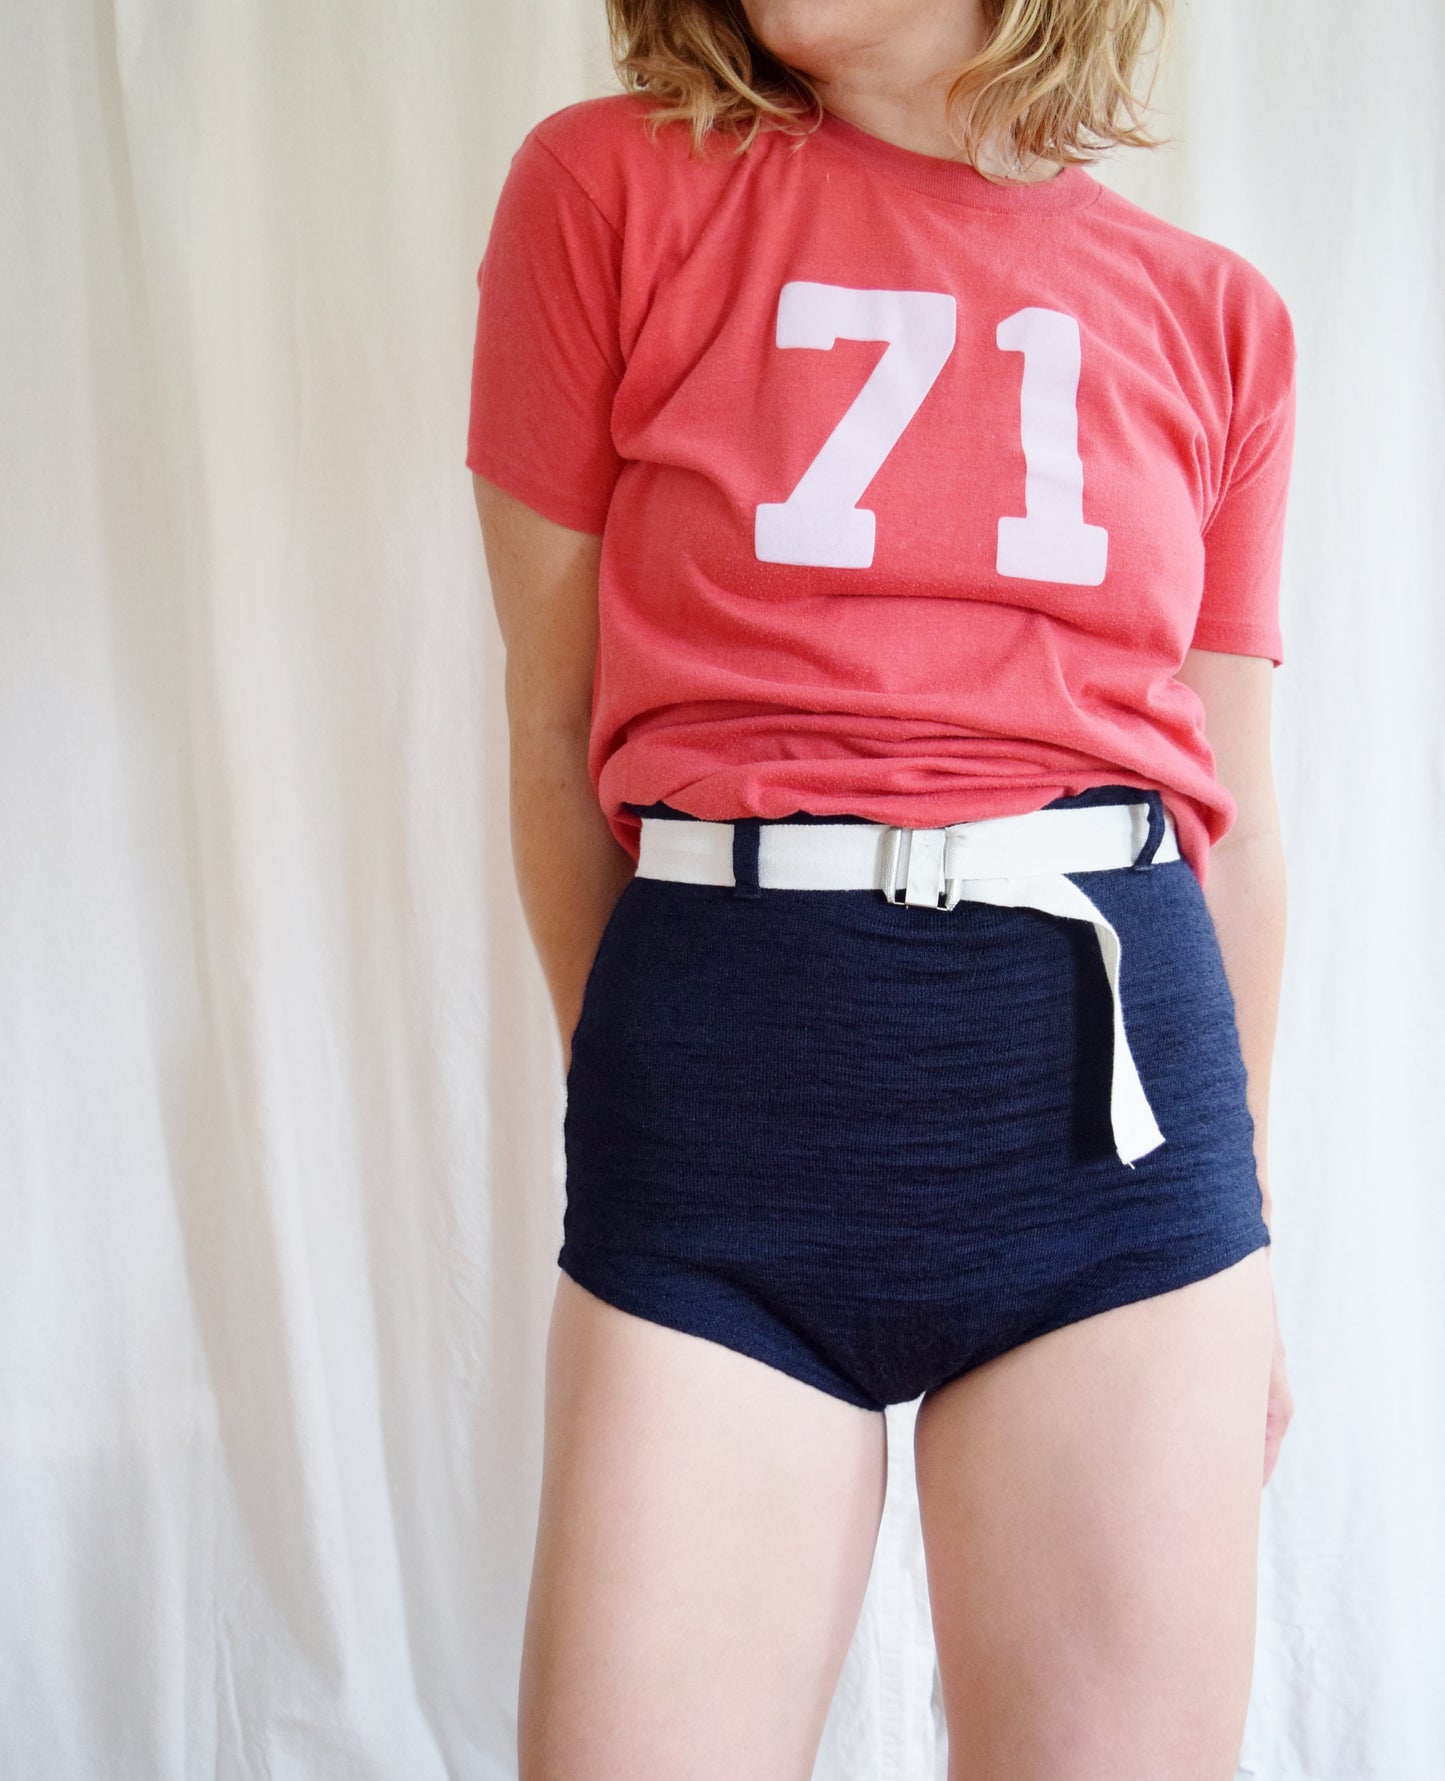 1970s  #71 Red Pinnie Tee | Athletic Shirt